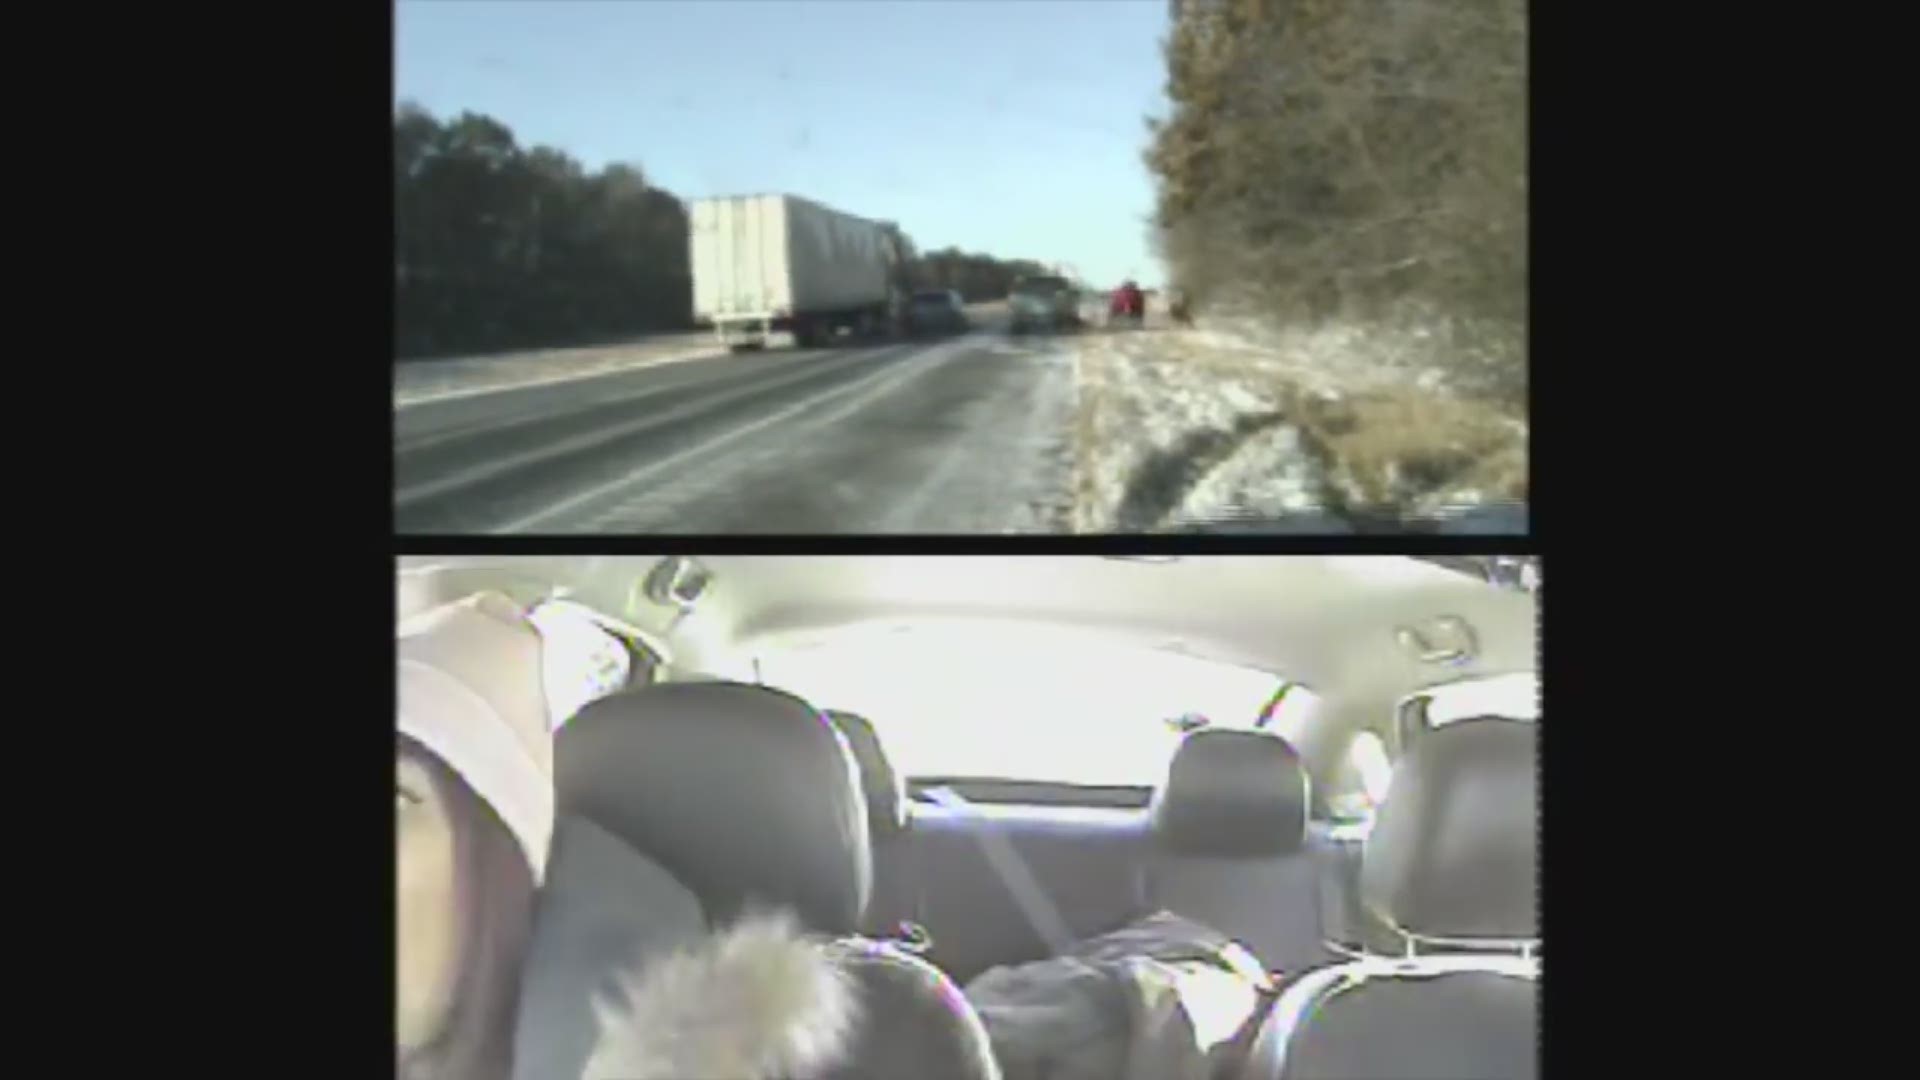 The dash camera also captured the reaction of a second woman who was sitting in the squad car.